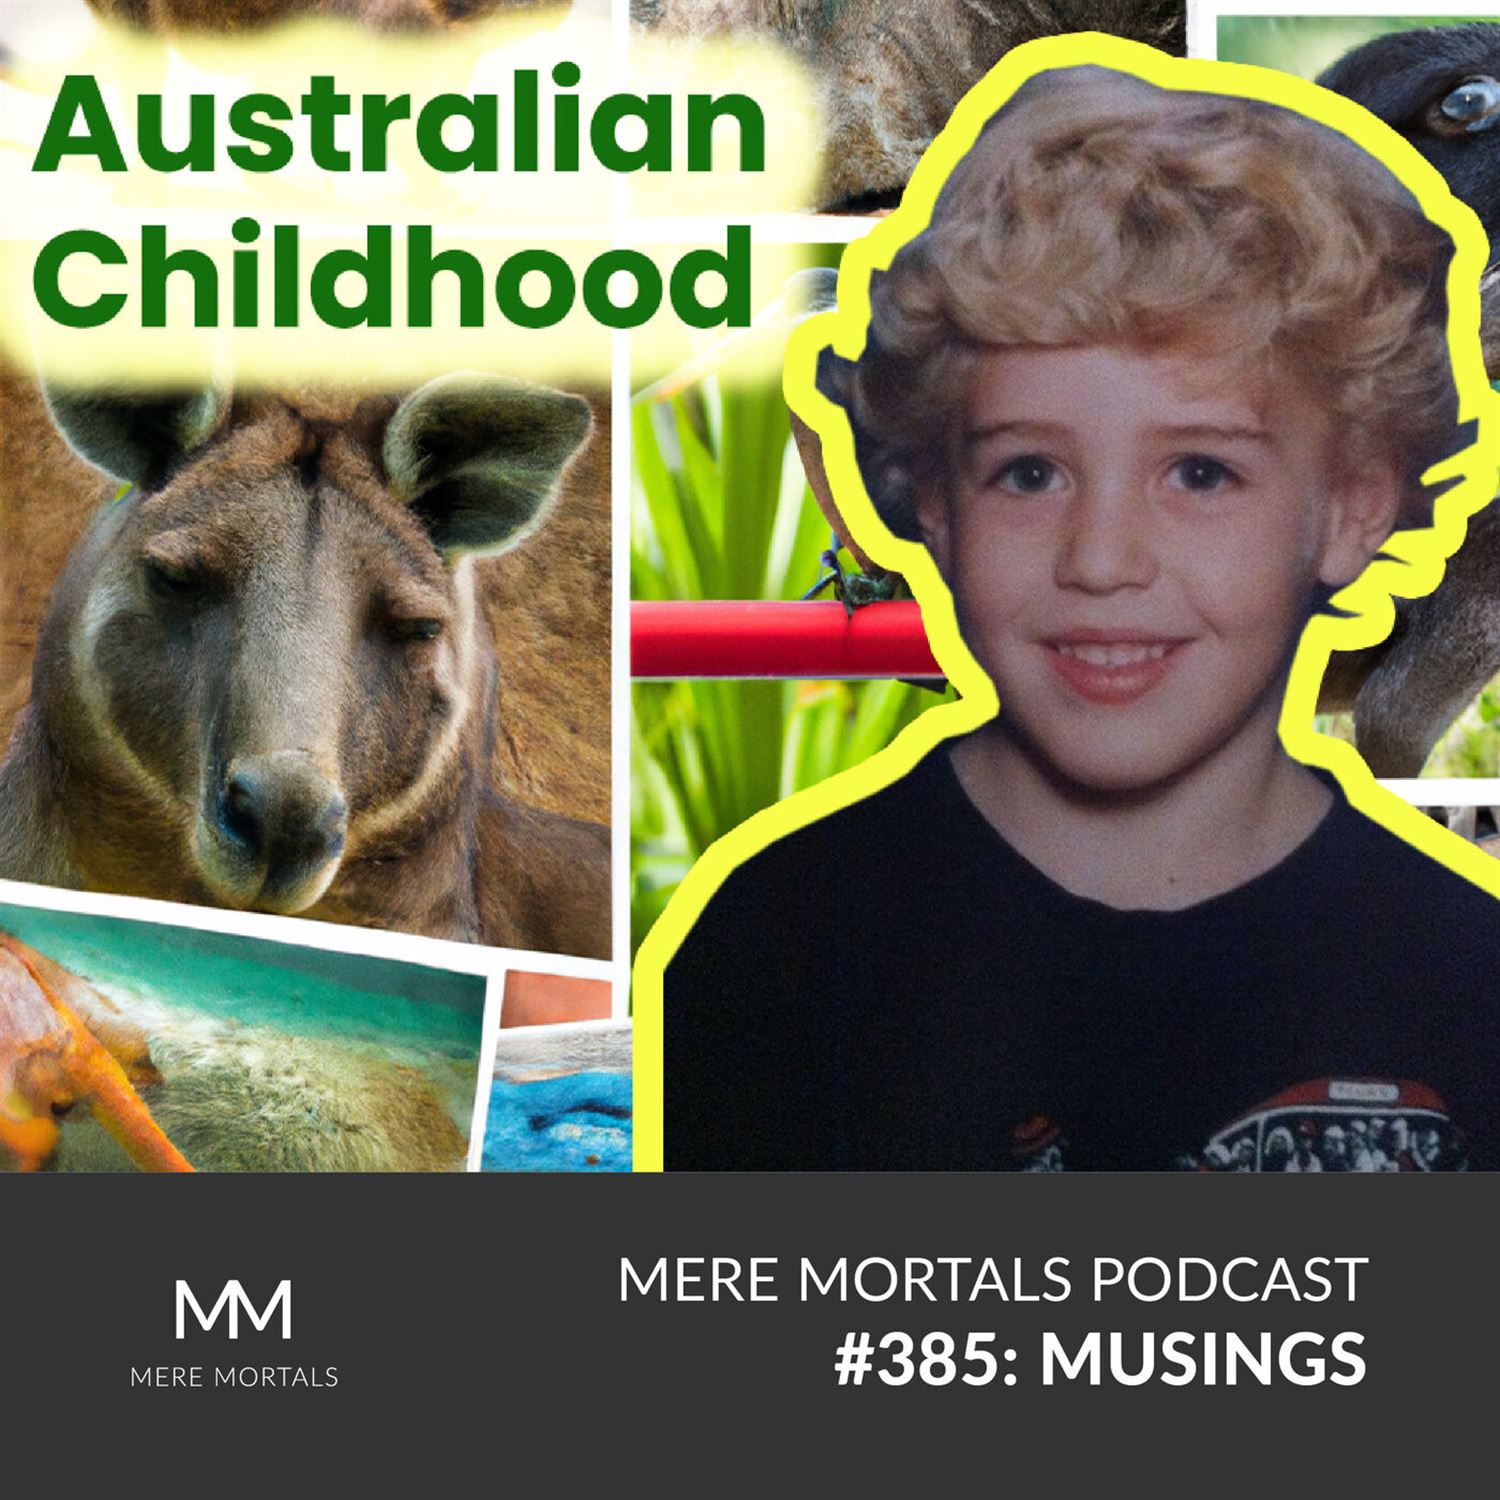 How Did I Survive The Aussie Wildlife? | Growing Up In Australia